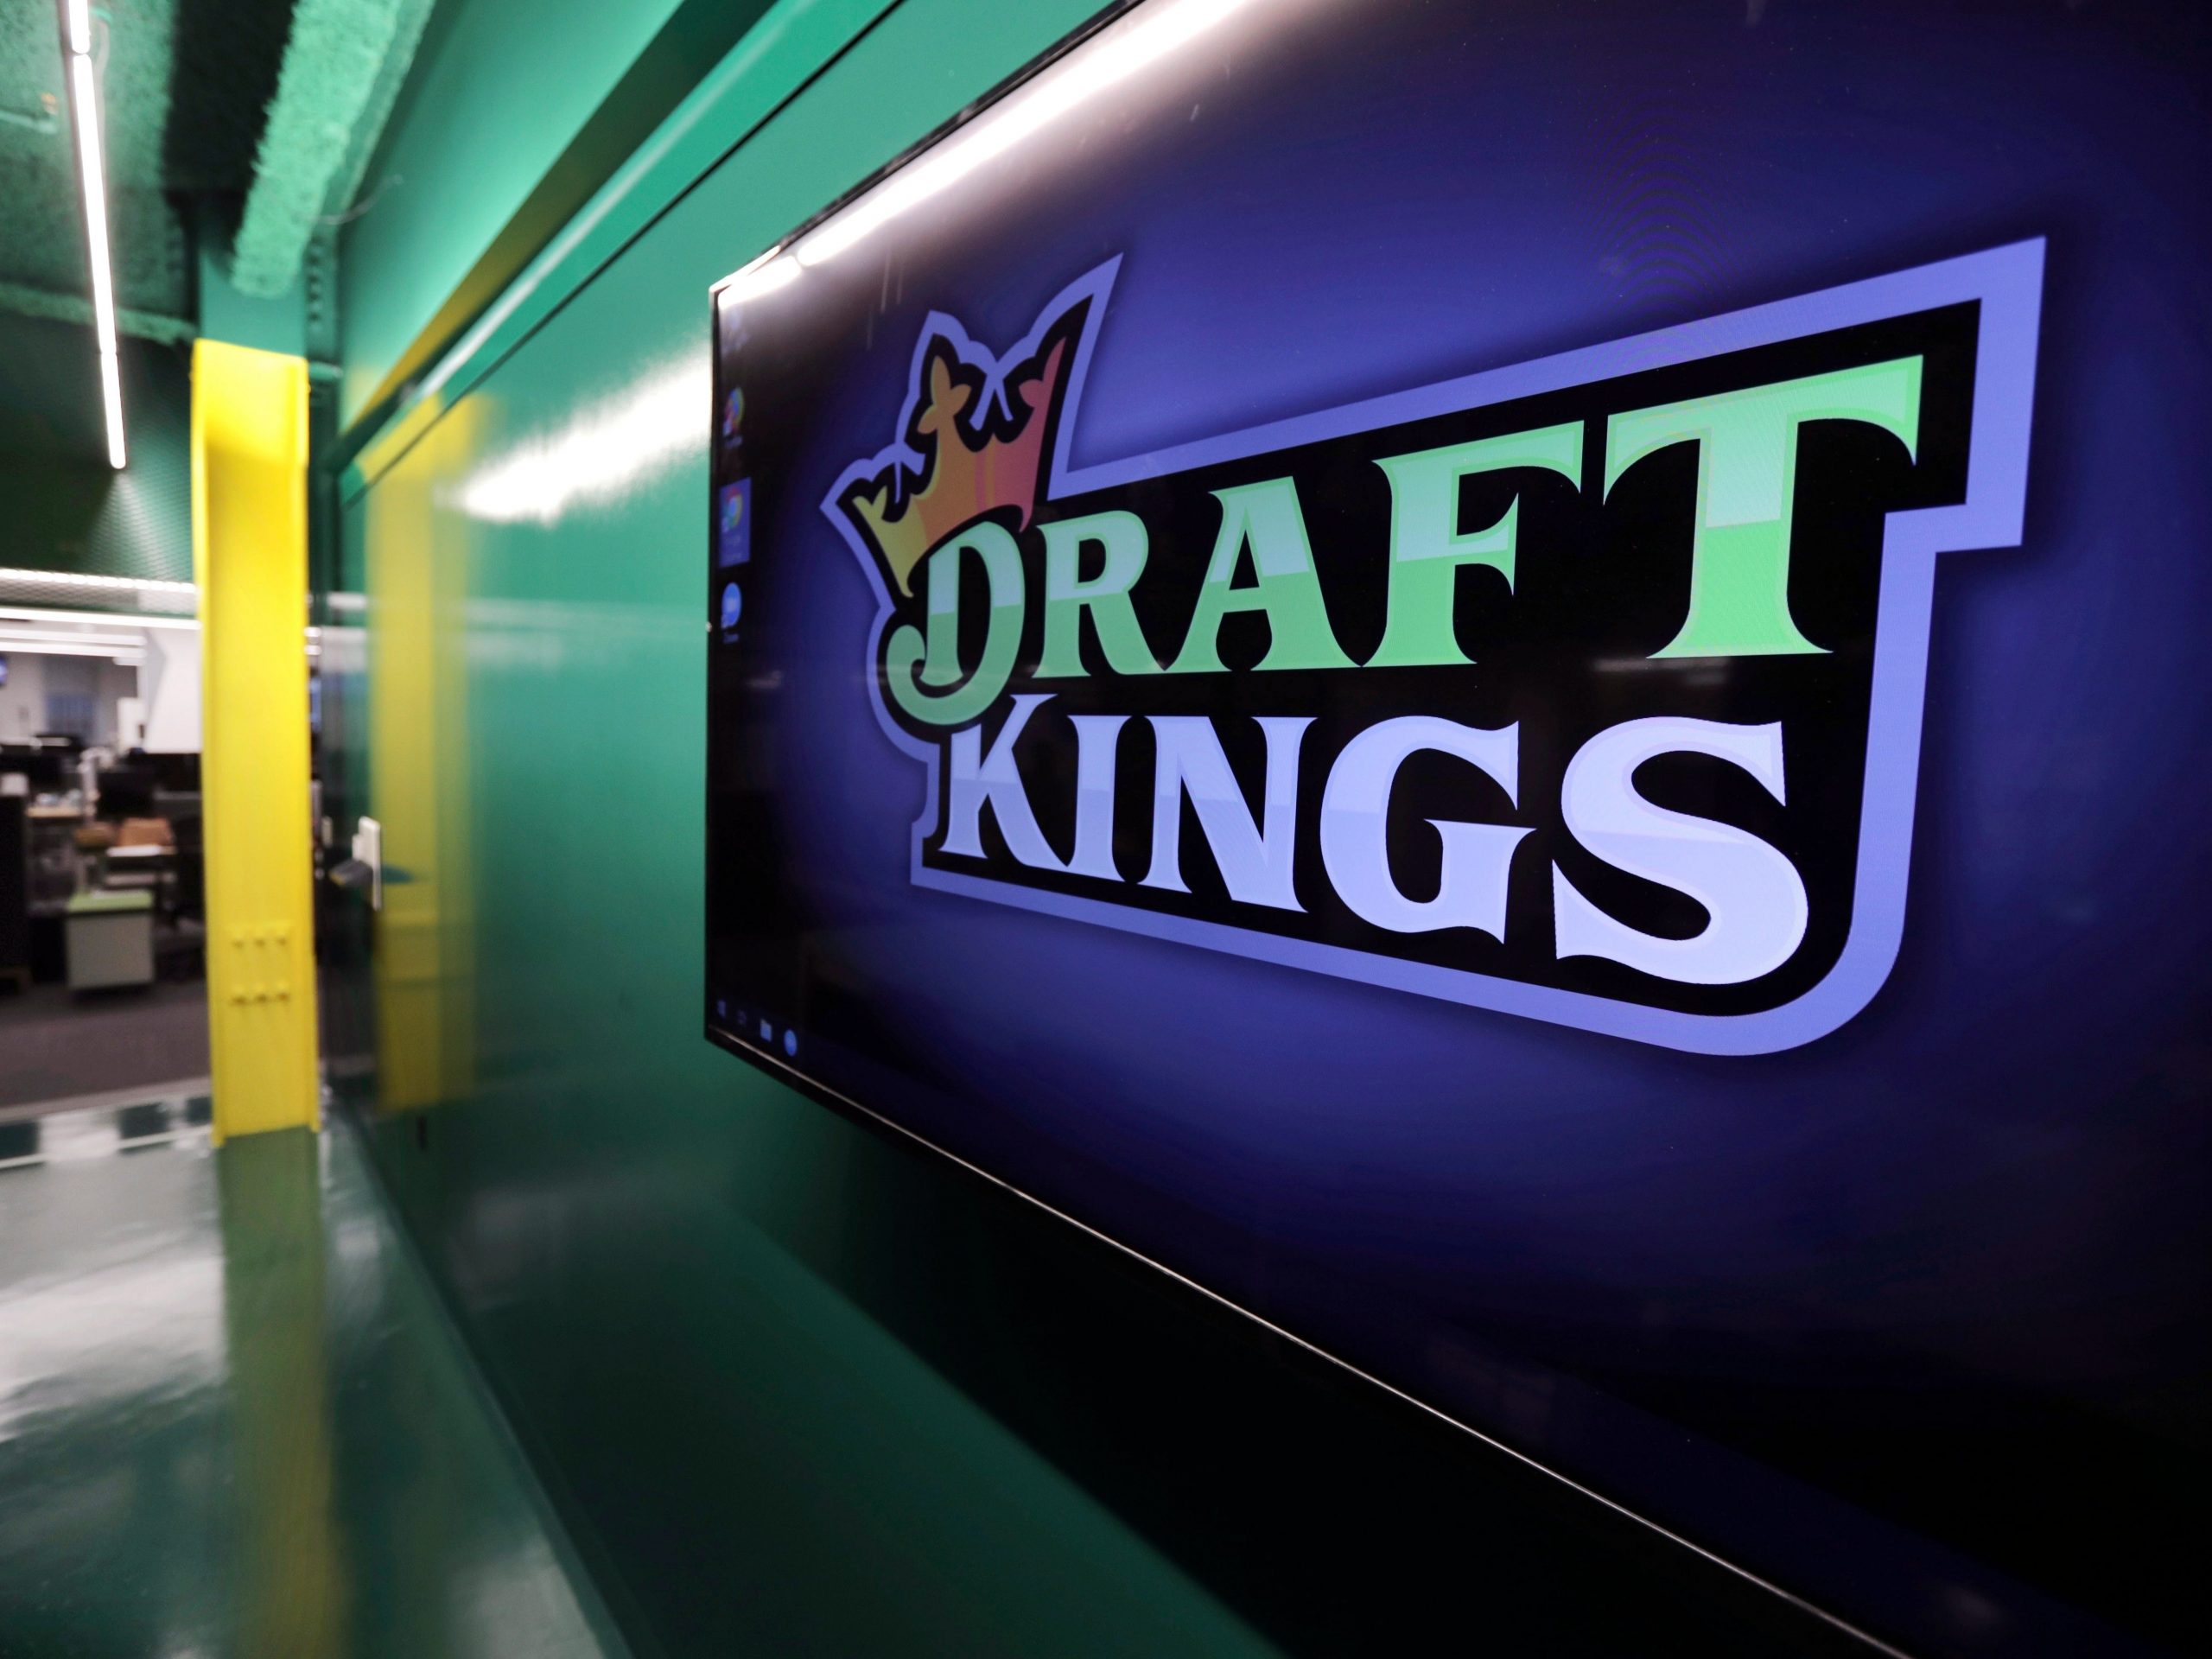 FILE - In this May 2, 2019, file photo, the DraftKings logo is displayed at the sports betting company headquarters in Boston. Sports daily fantasy and betting website DraftKings will debut as a publicly traded company Friday, April 24, 2020, against a backdrop of a near-complete shutdown of athletic competition across the globe due to the coronavirus pandemic. (AP Photo/Charles Krupa, File)